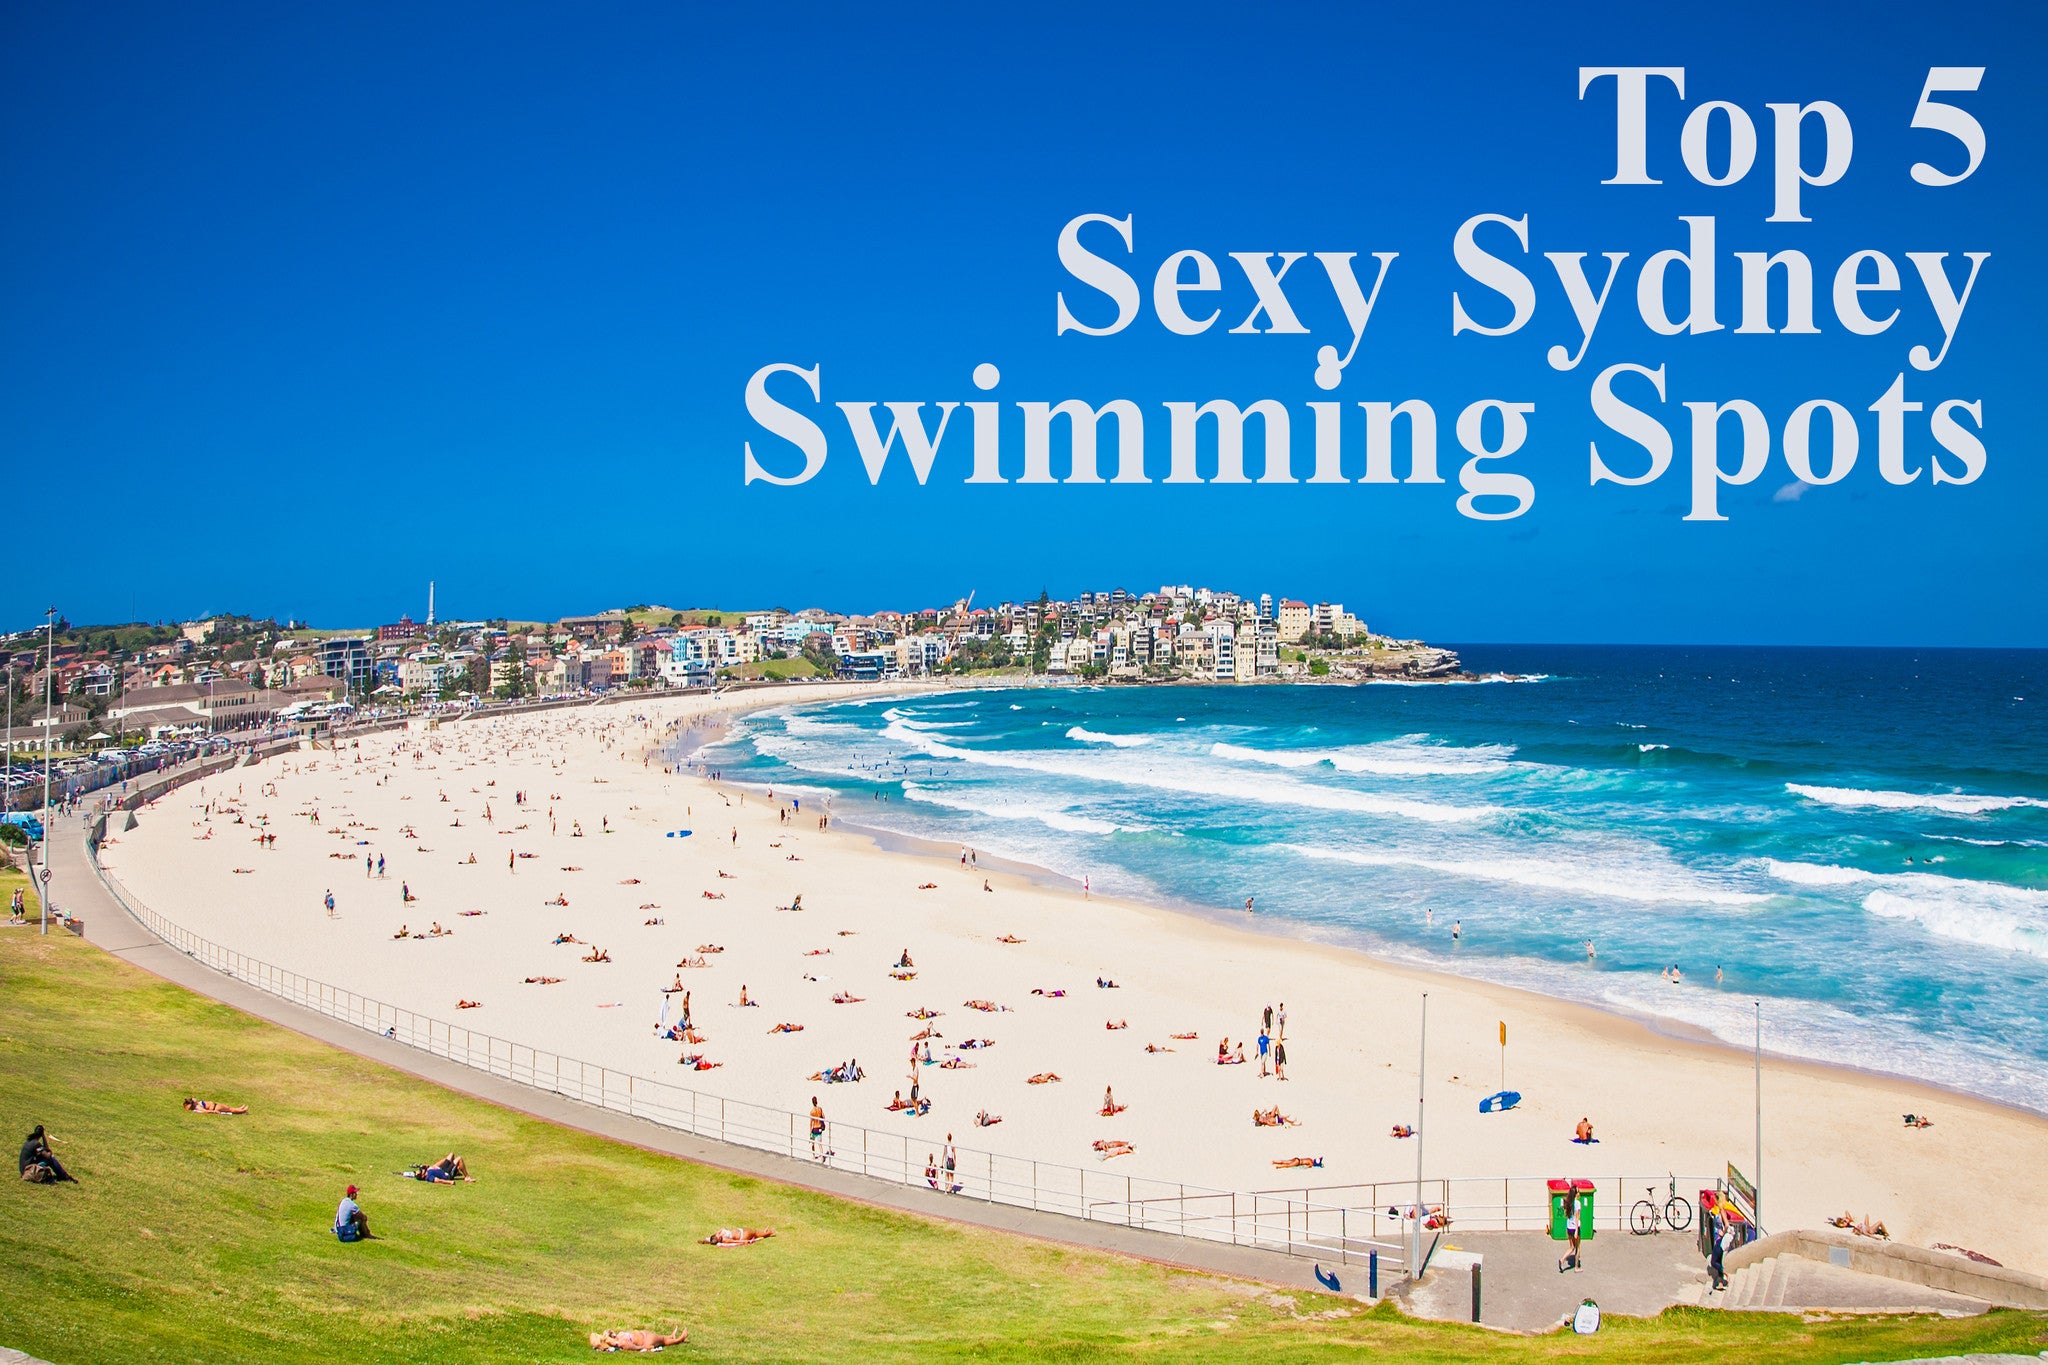 Where the cool kids hang - the Top 5 Sexy Sydney Swimming Spots